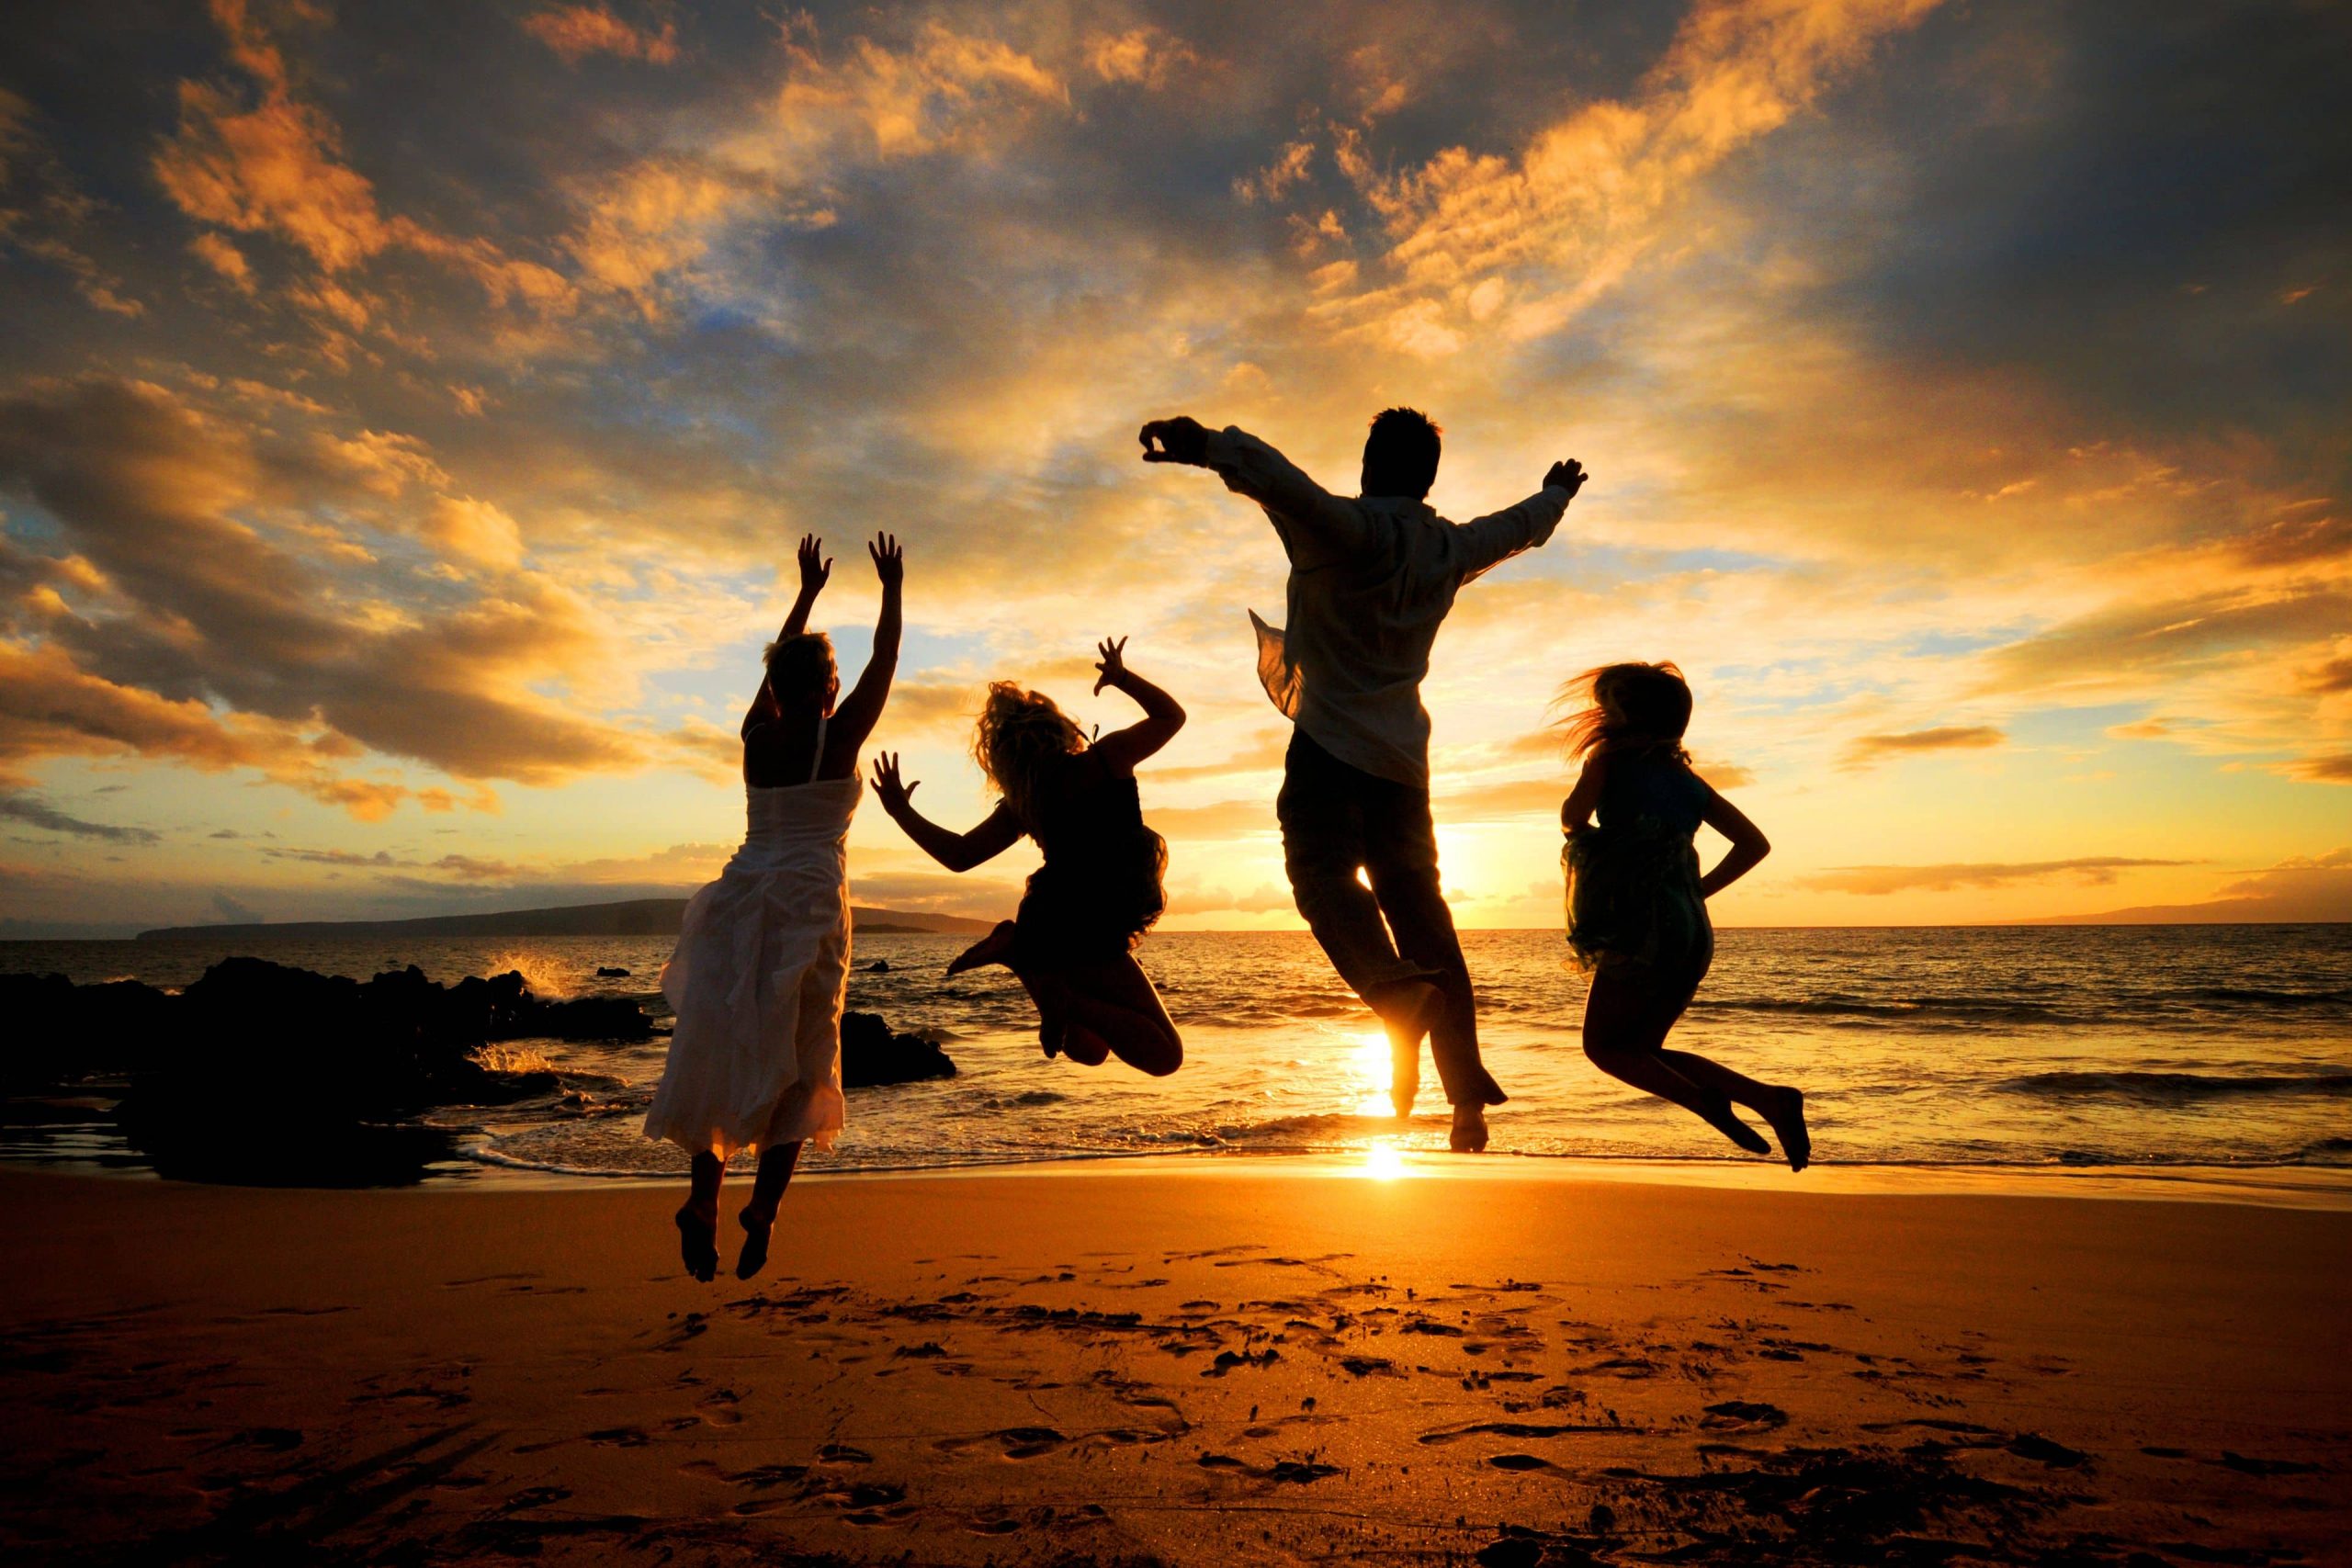 Family jumping on the beach silhouetted as the sun sets behind them over the ocean in Hawaii